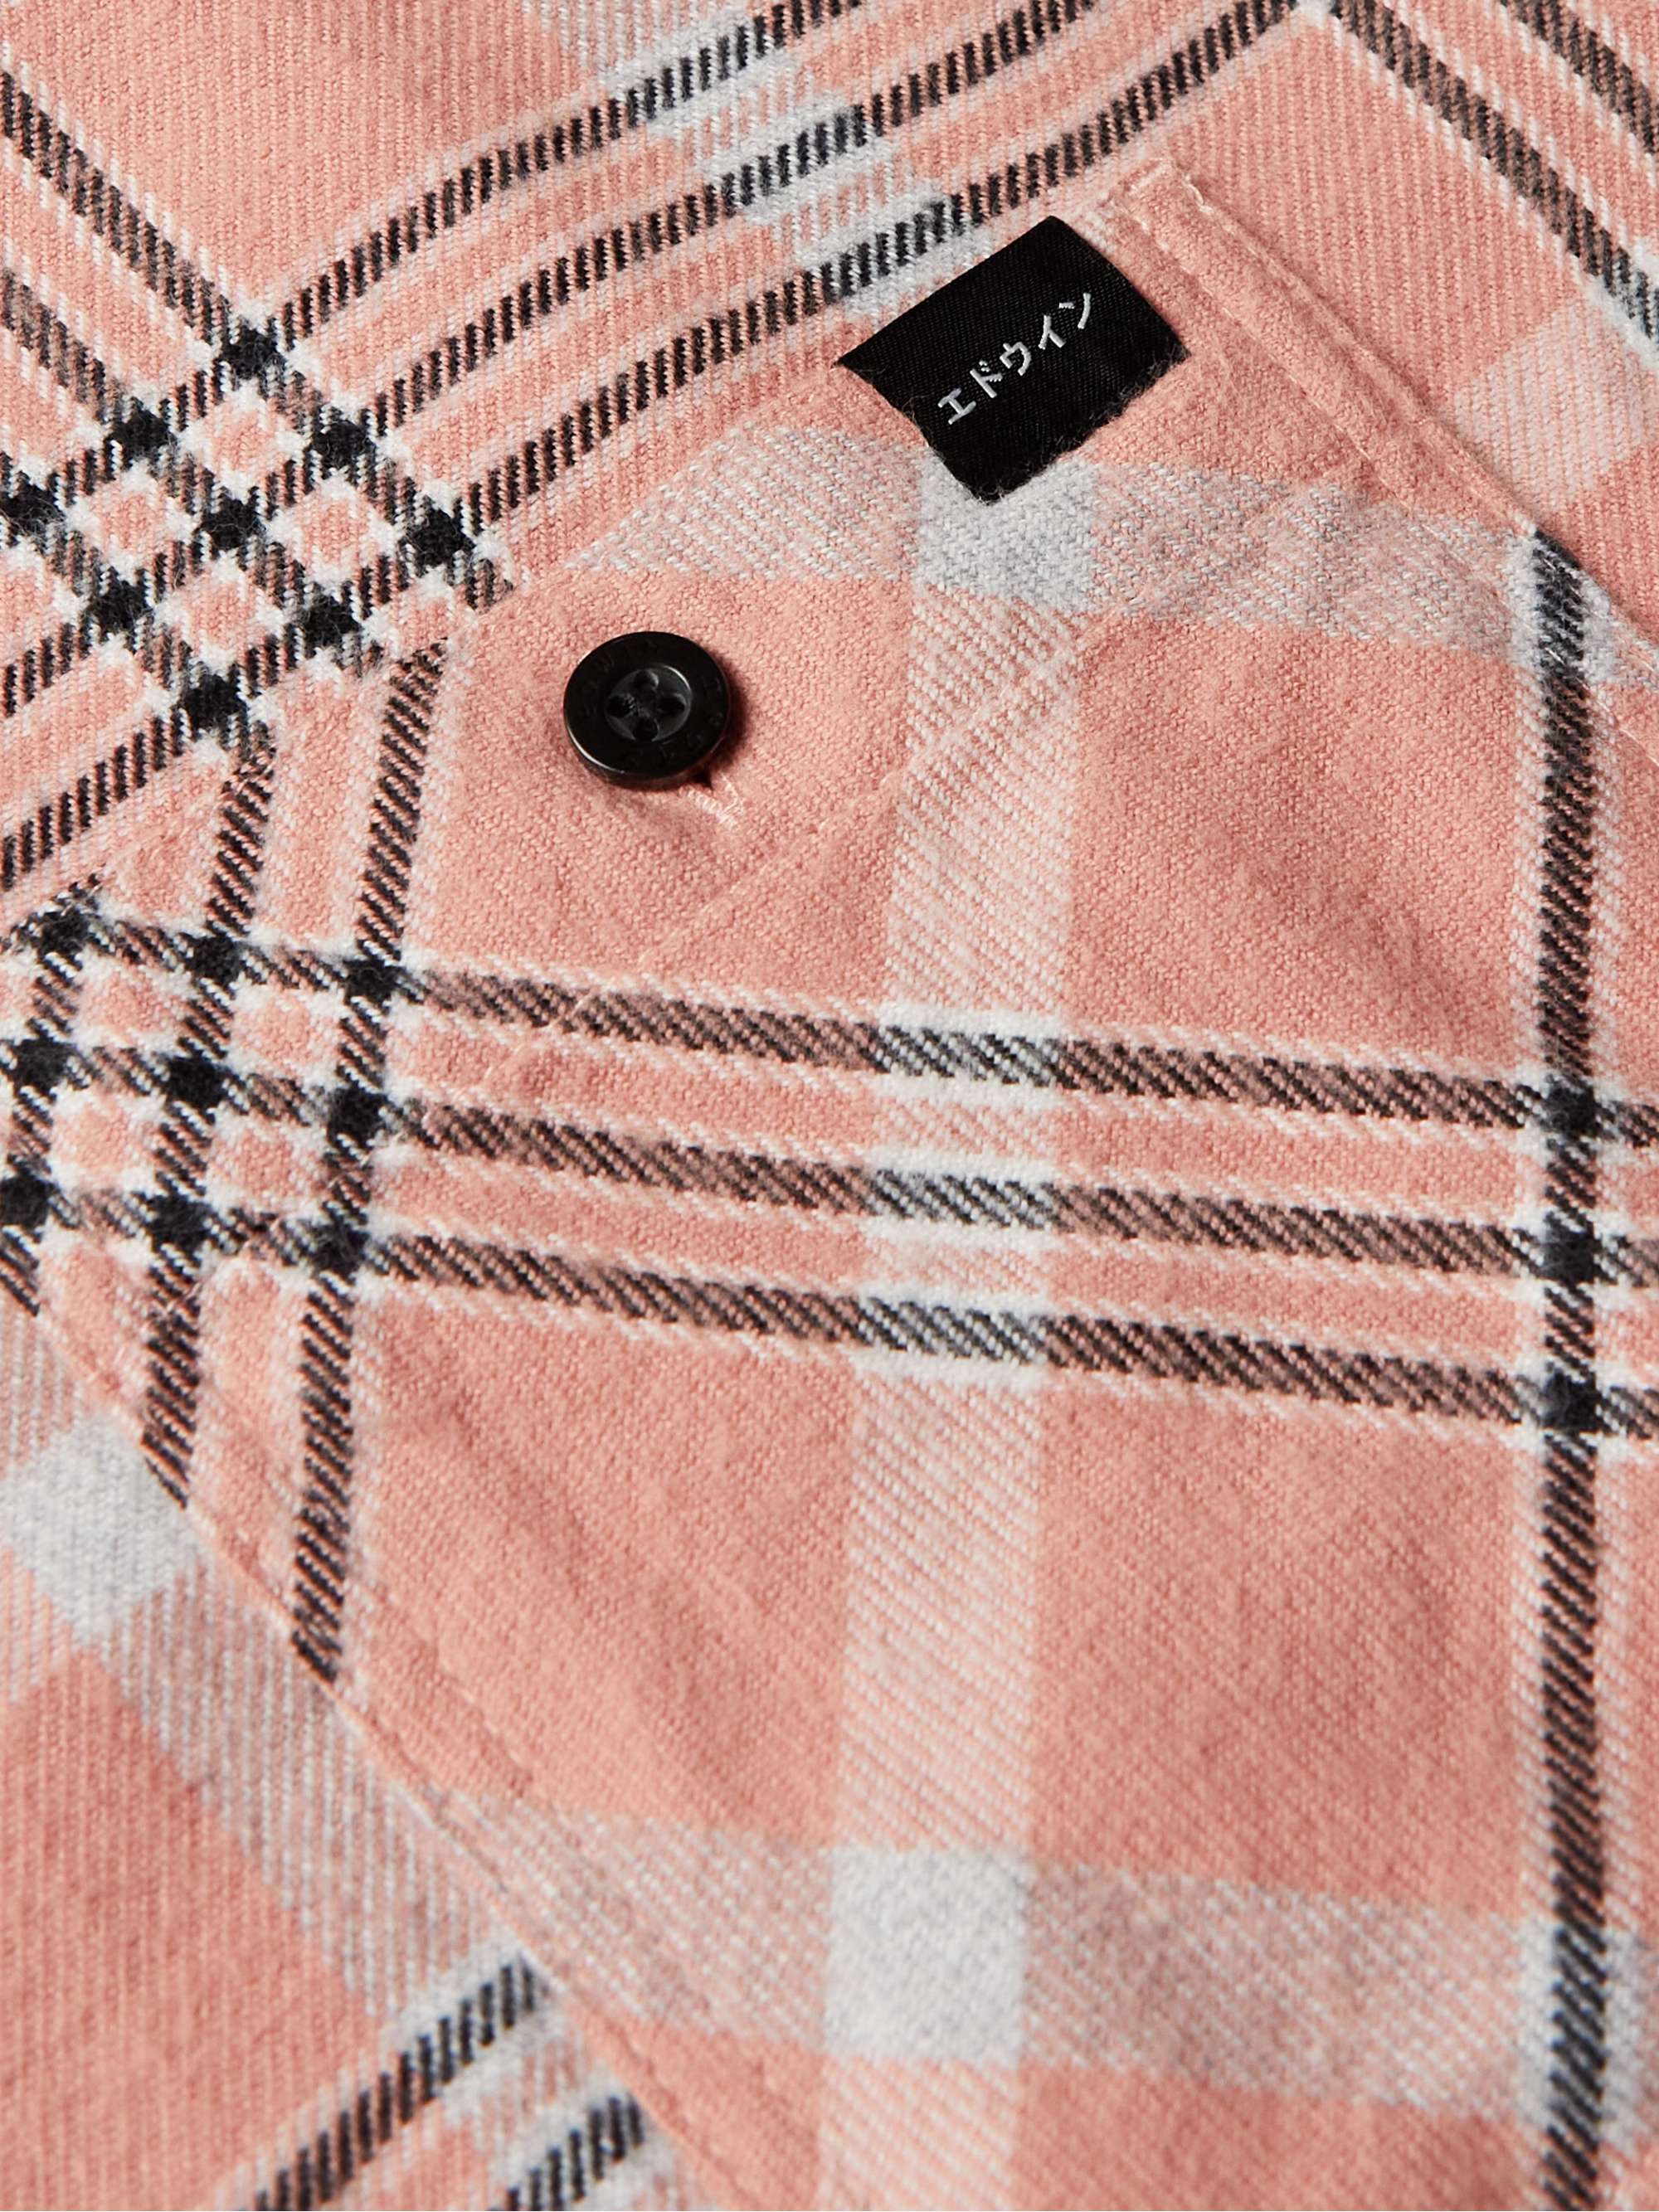 EDWIN Checked Cotton-Flannel Shirt